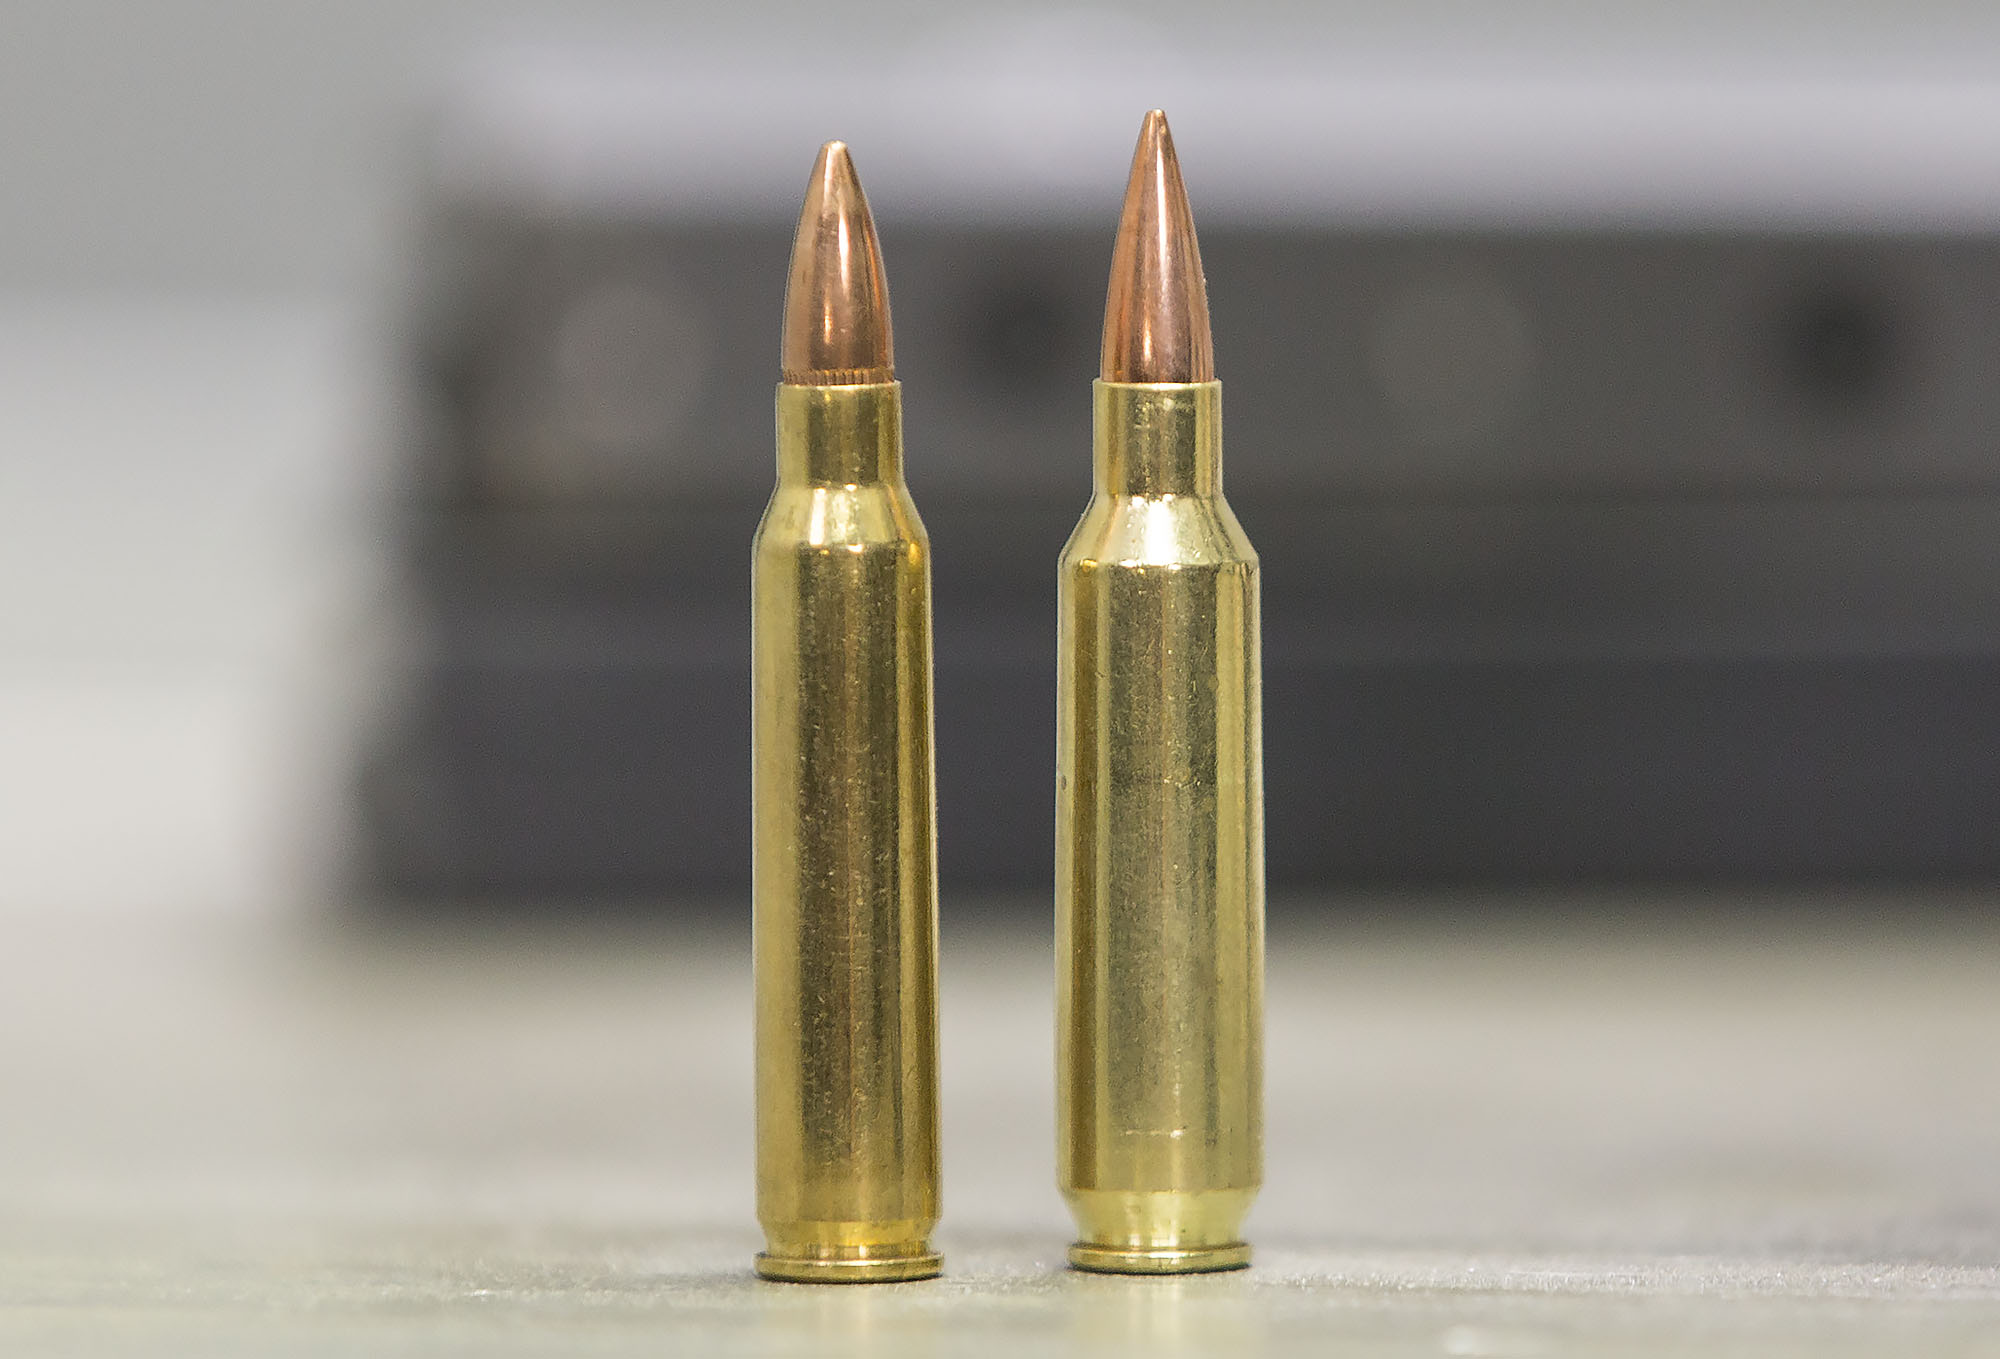 22 Nosler: The Goals are Simple.